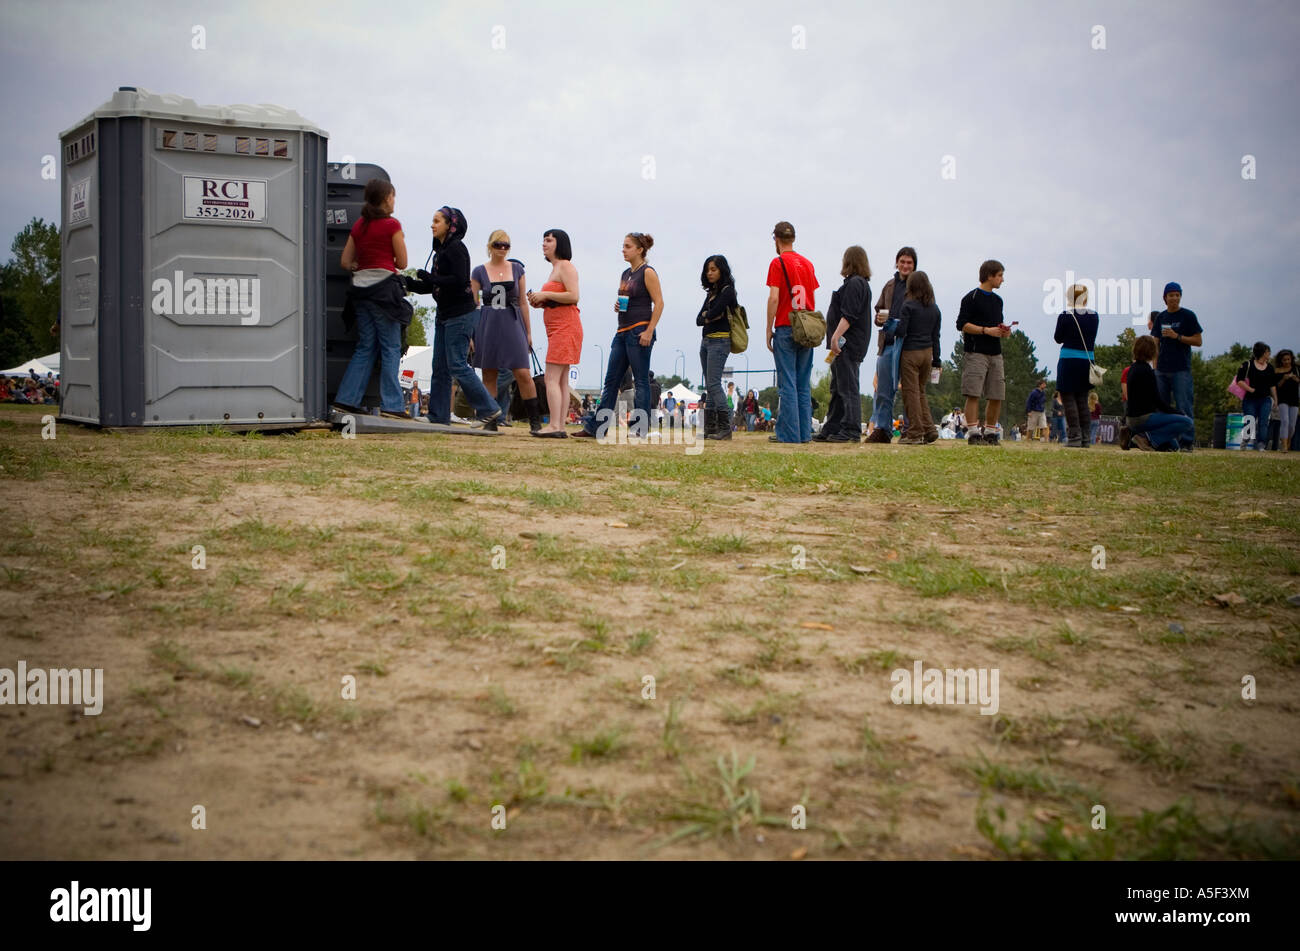 A queue of people waiting to use an outdoor chemical toilet Stock Photo